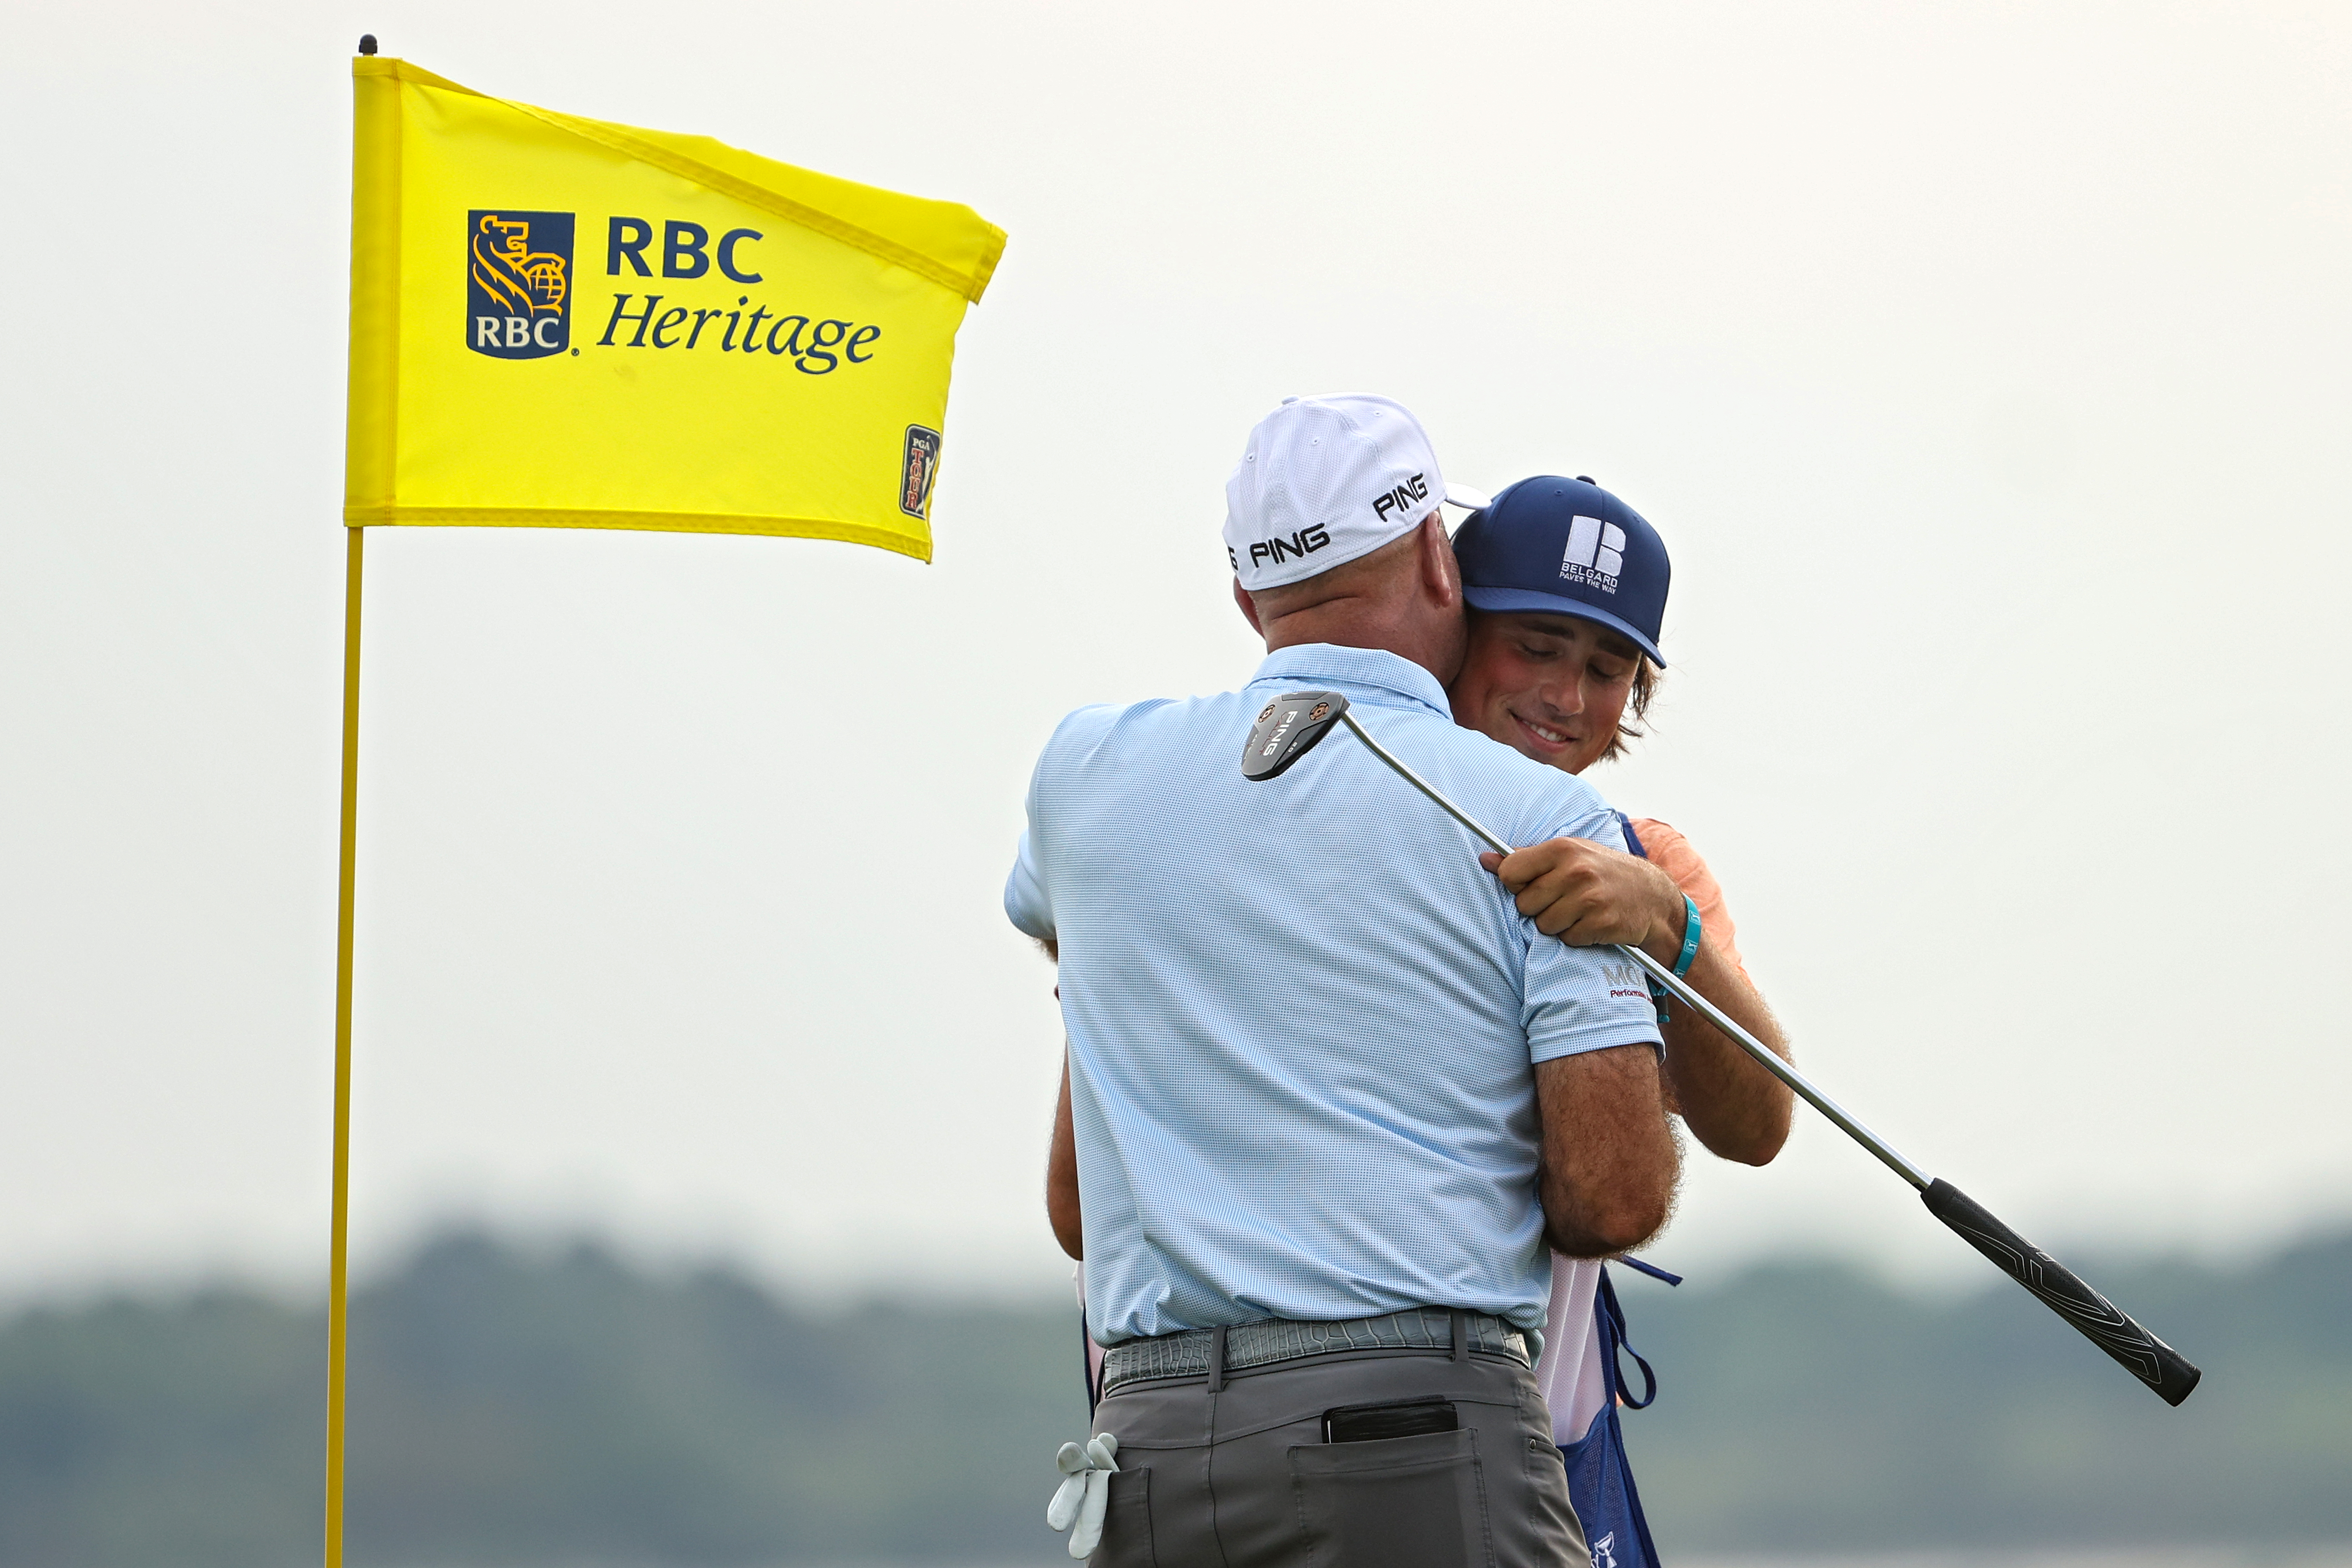 When is the next PGA Tour golf event after The Masters? RBC Heritage Classic dates